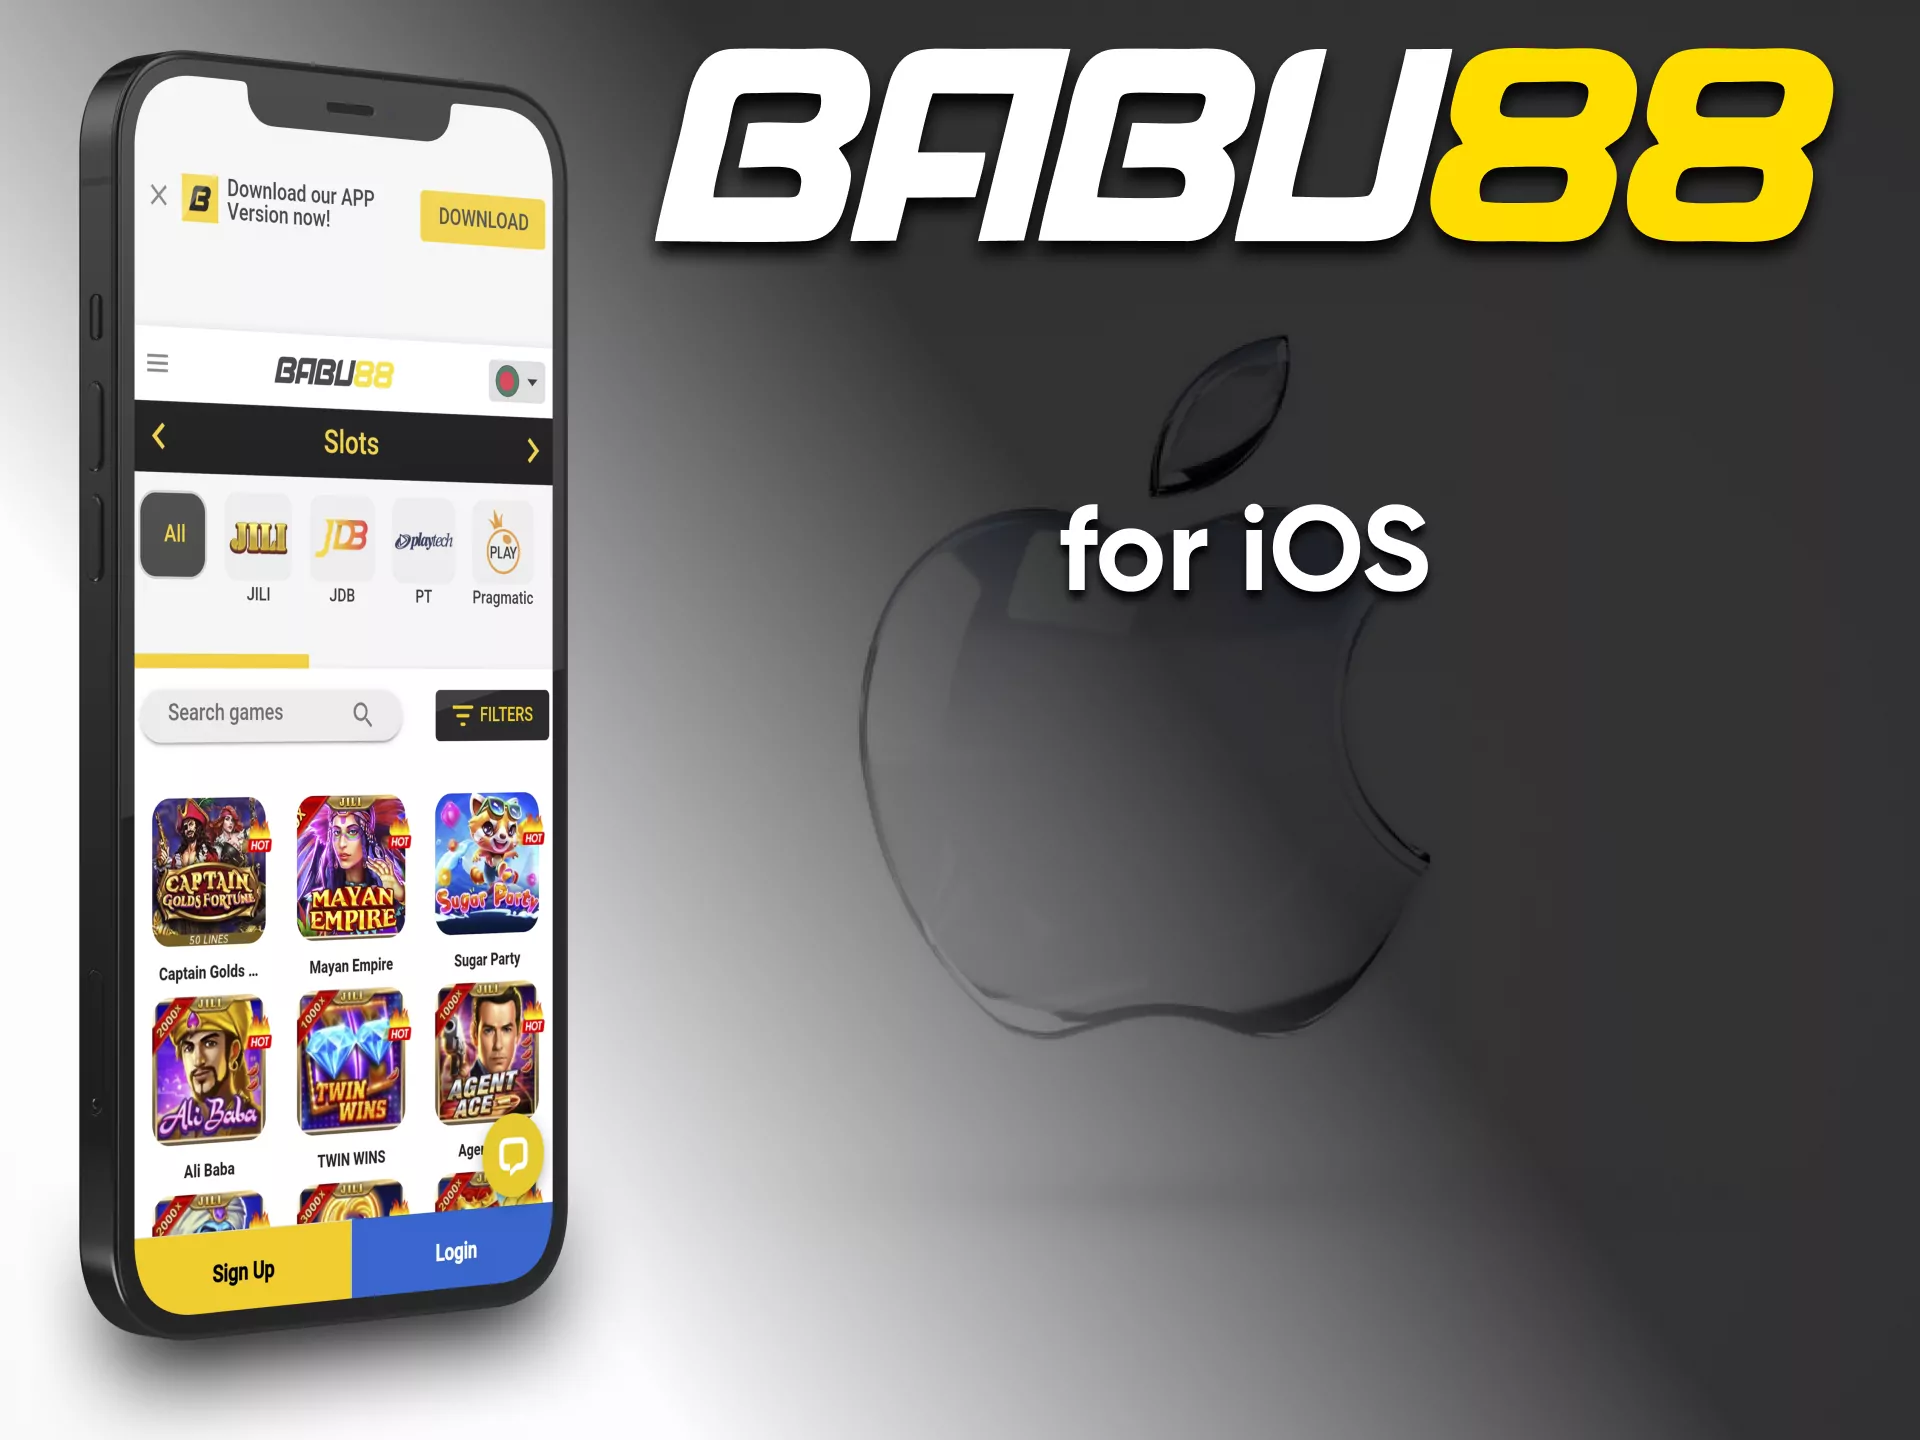 The Babu88 app can be installed for ios.